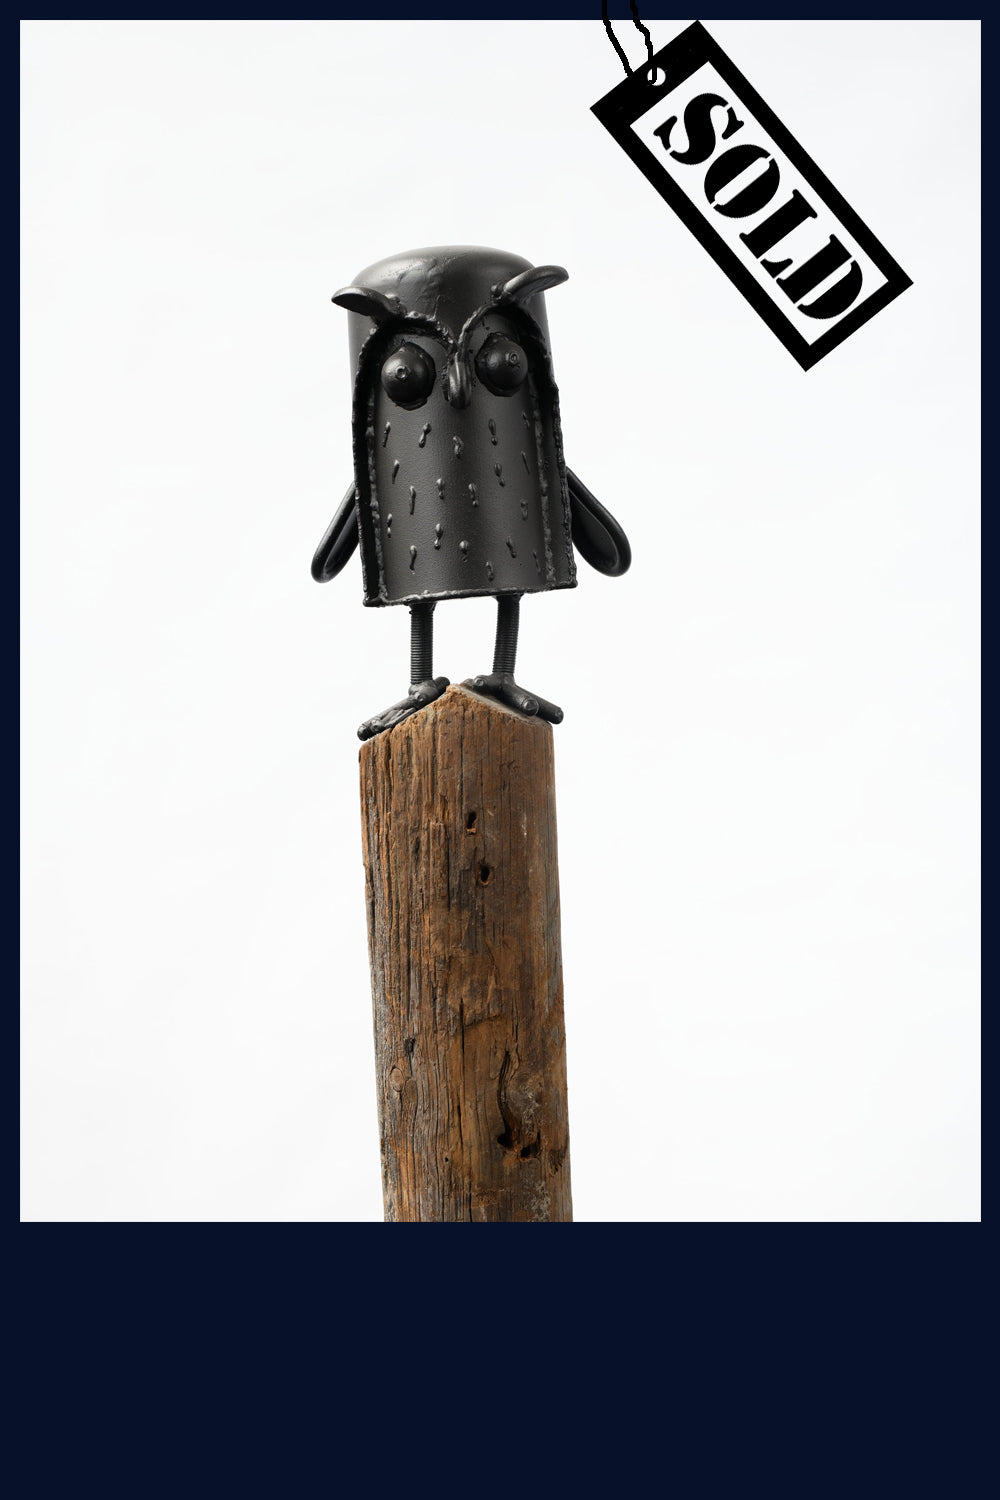 SOLD Small Owl 1 Sculpture by Mick Kirkby-Geddes